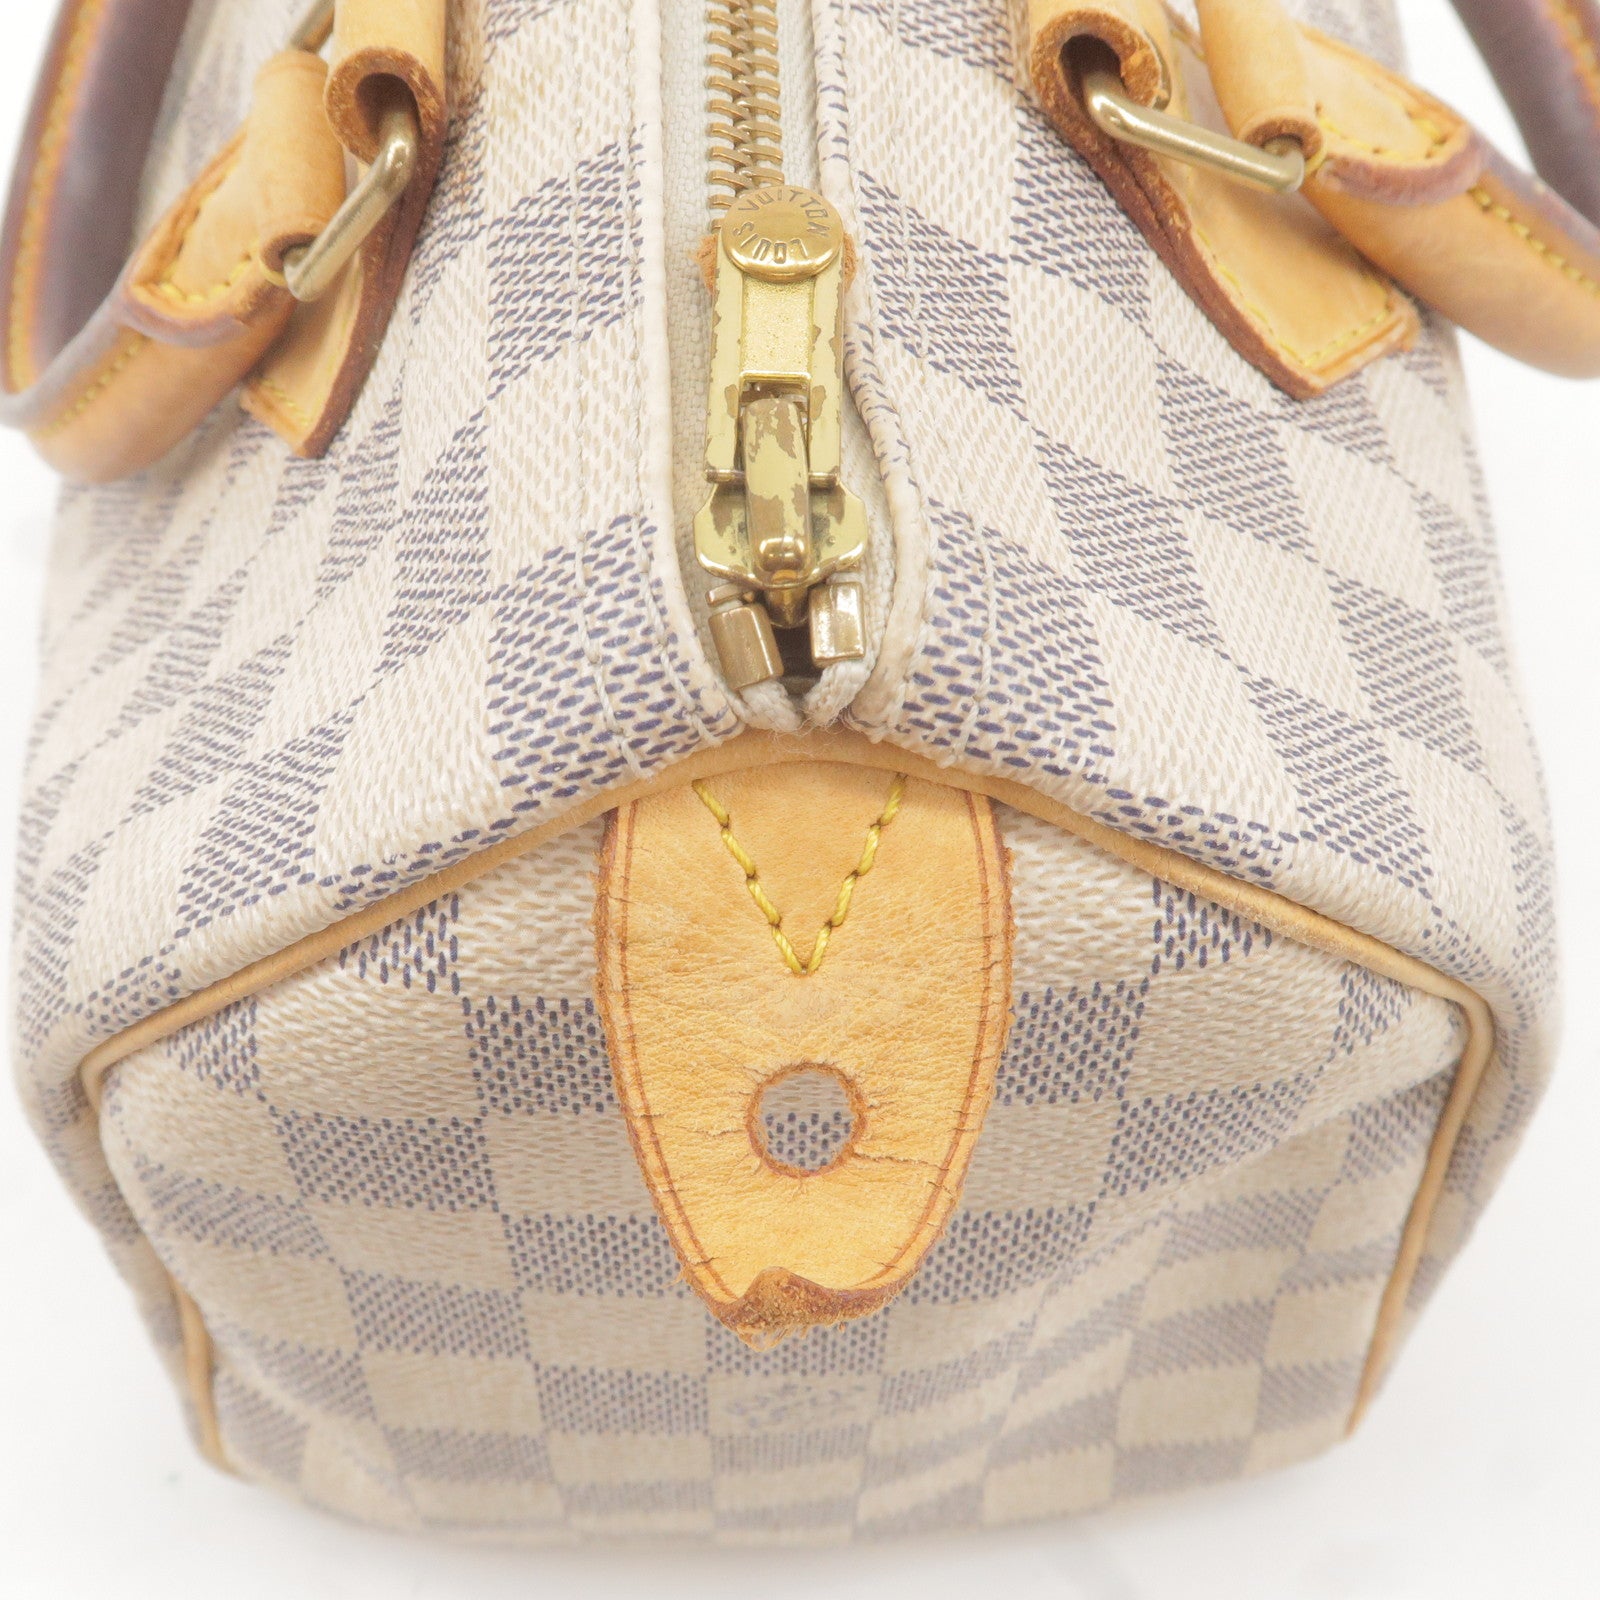 Louis Vuitton Limited Edition Yellow Monogram Canvas Tribal Mask